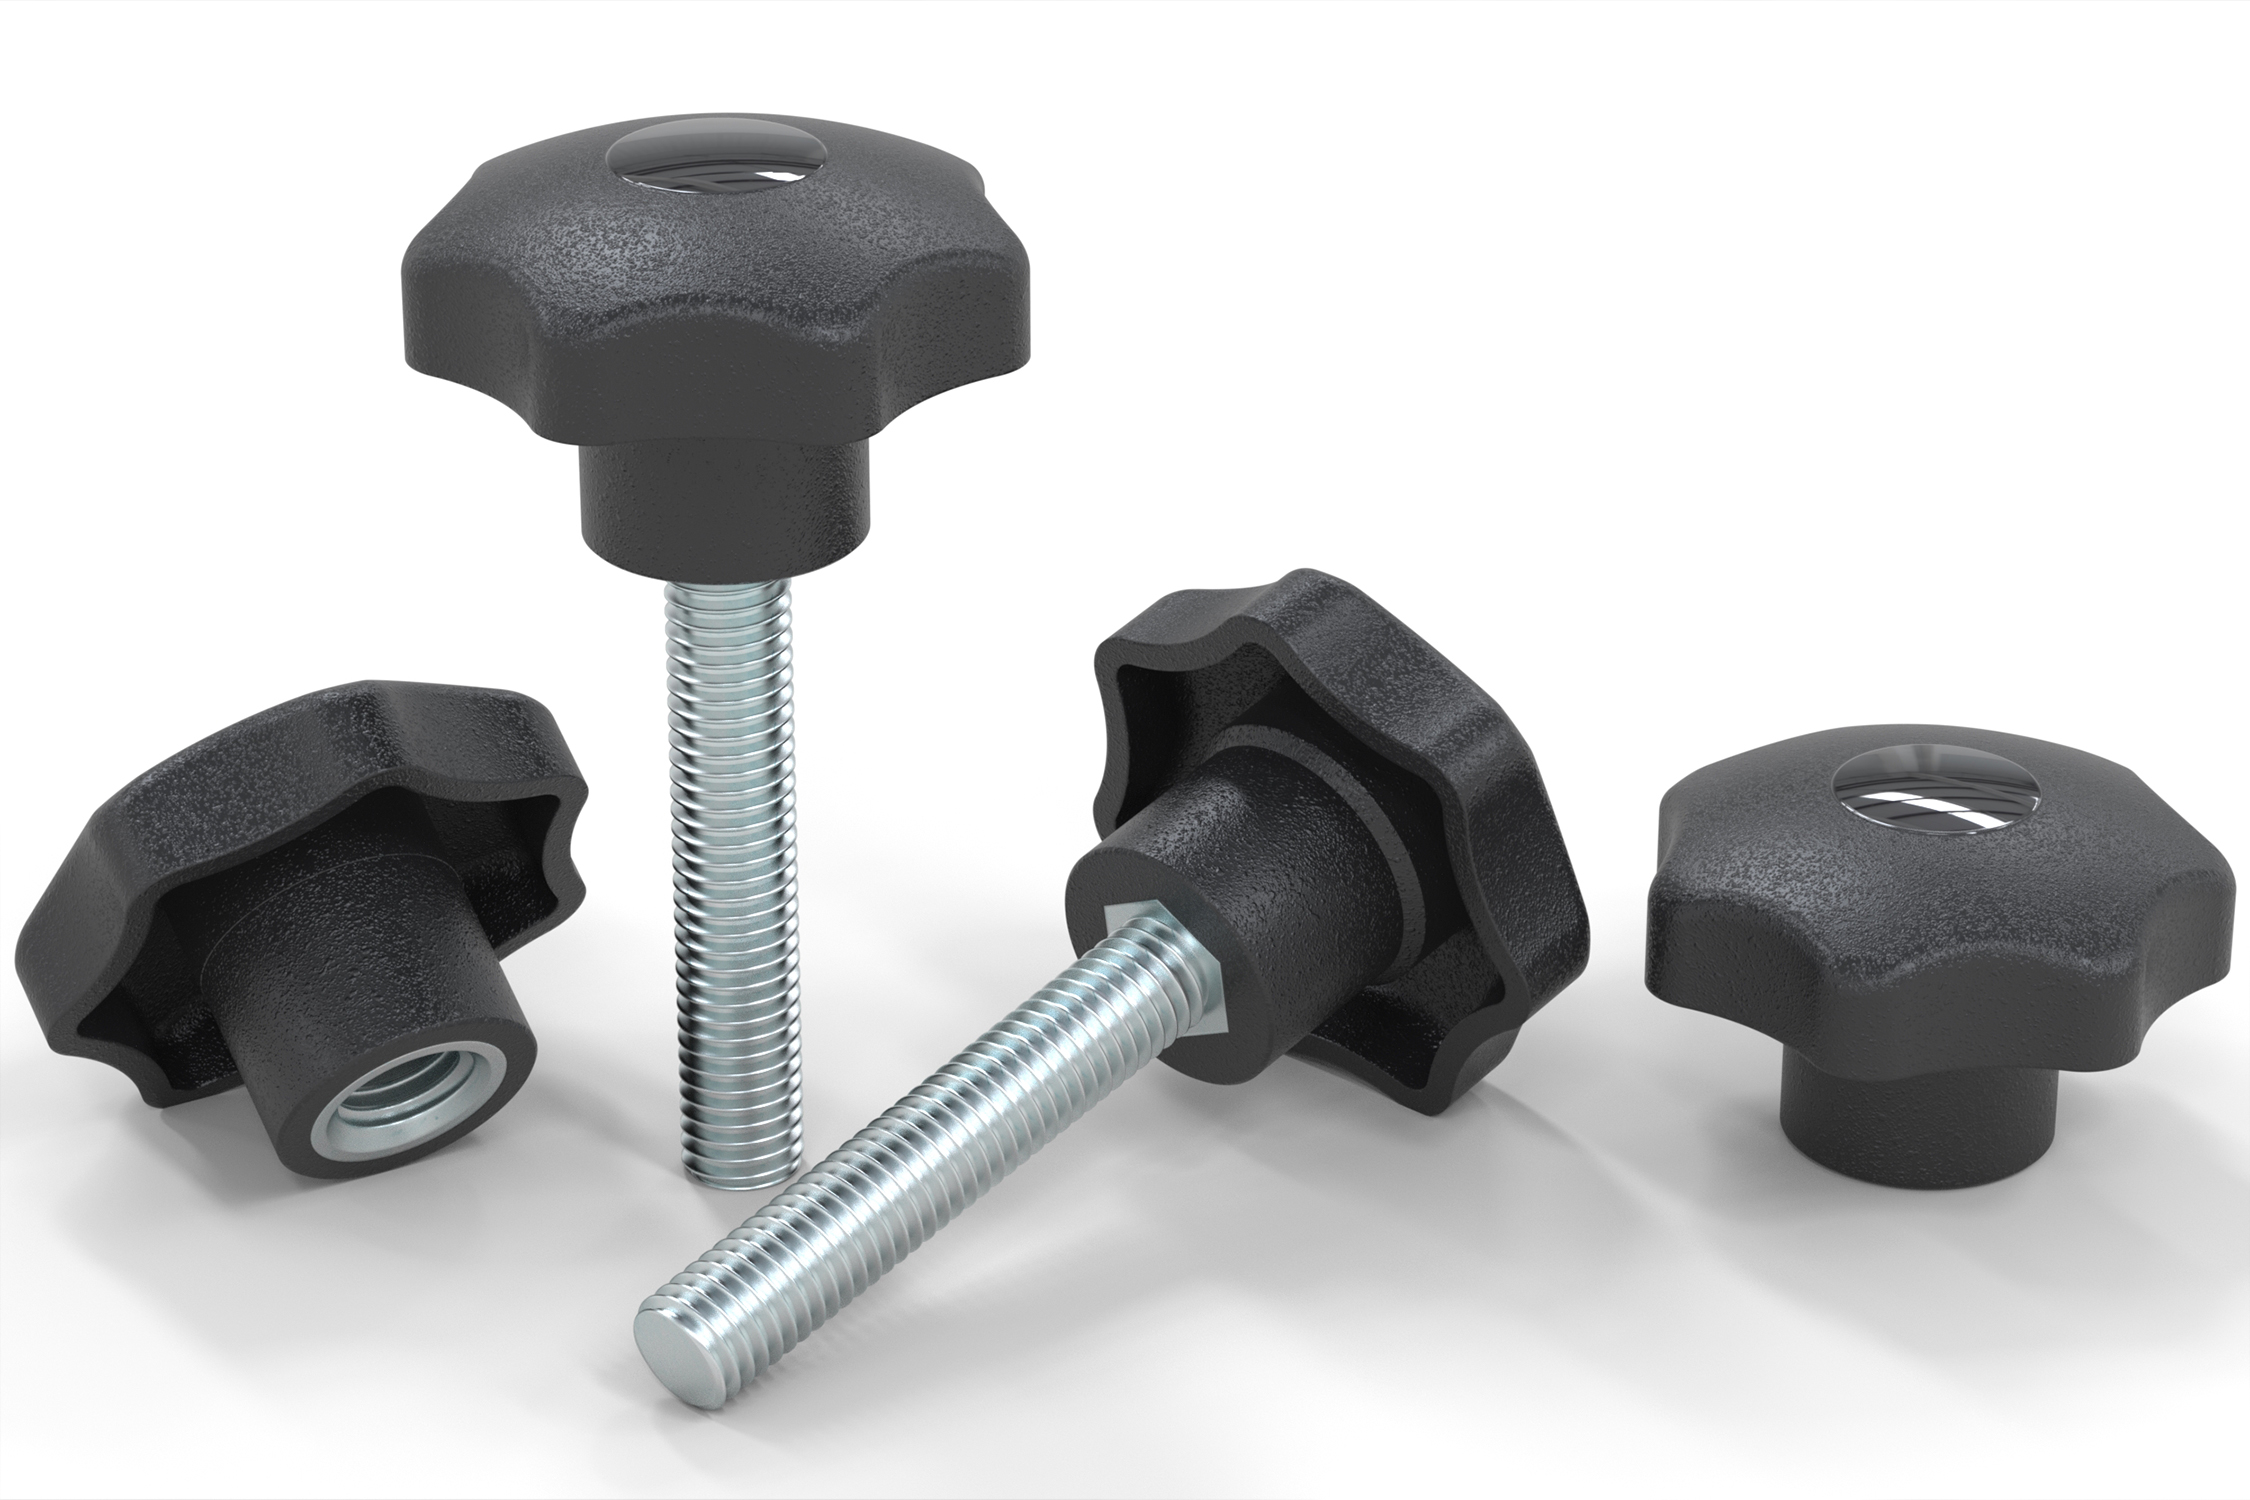 WDS range of glass-reinforced polymer hand knobs in a biopolymer source.